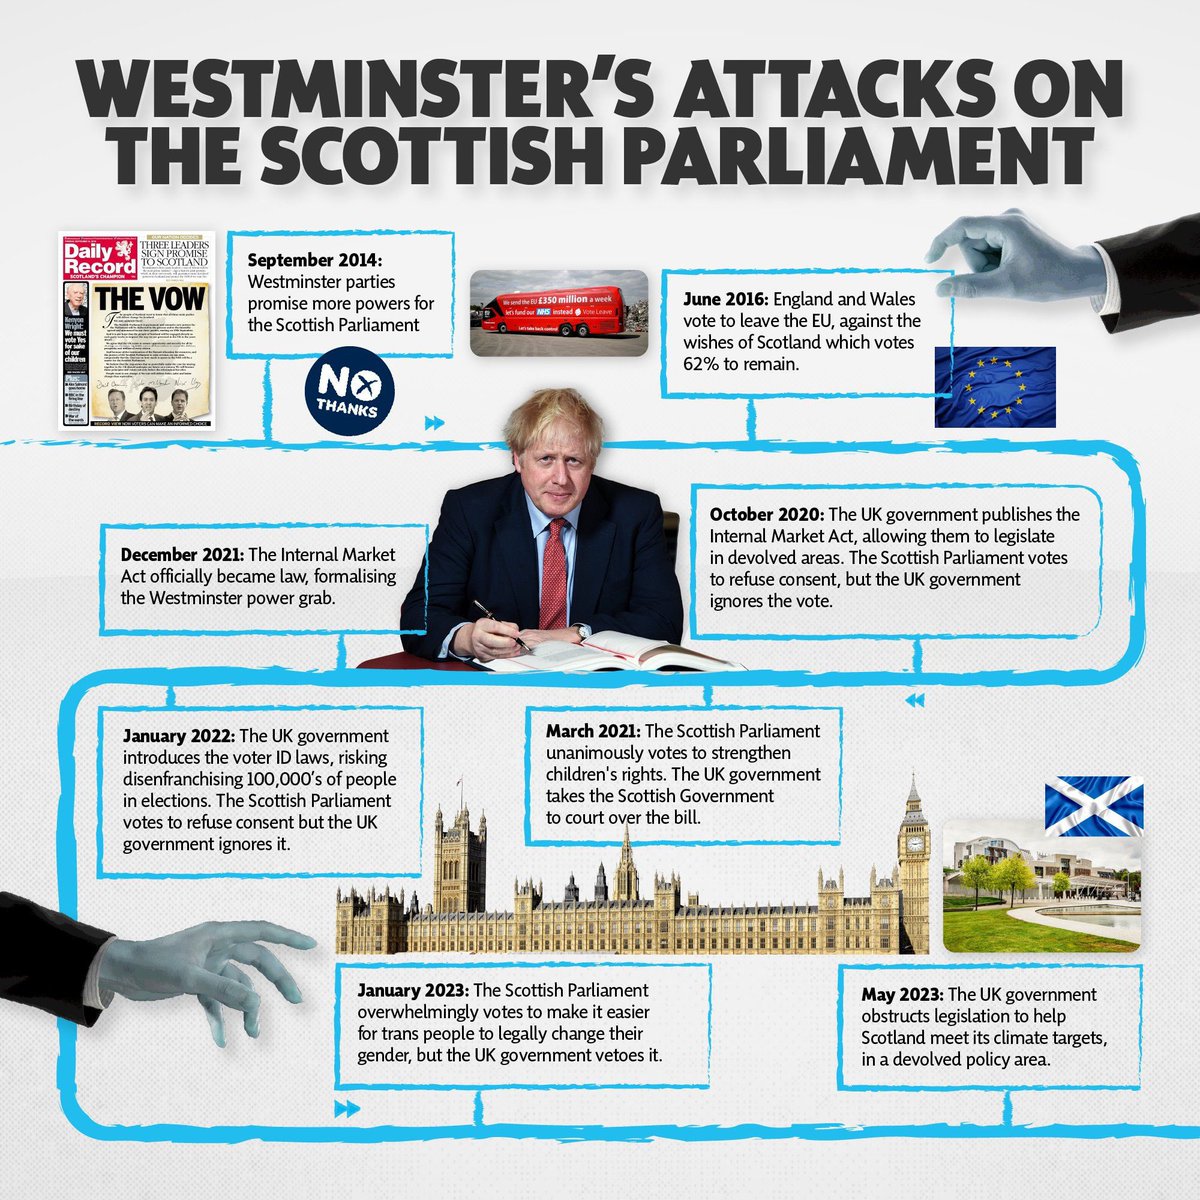 1/3 The @scotgov has today published a paper setting out the ways in which the UK Government is undermining the democratically elected Scottish Parliament. You can find the paper at the following link: gov.scot/publications/d…